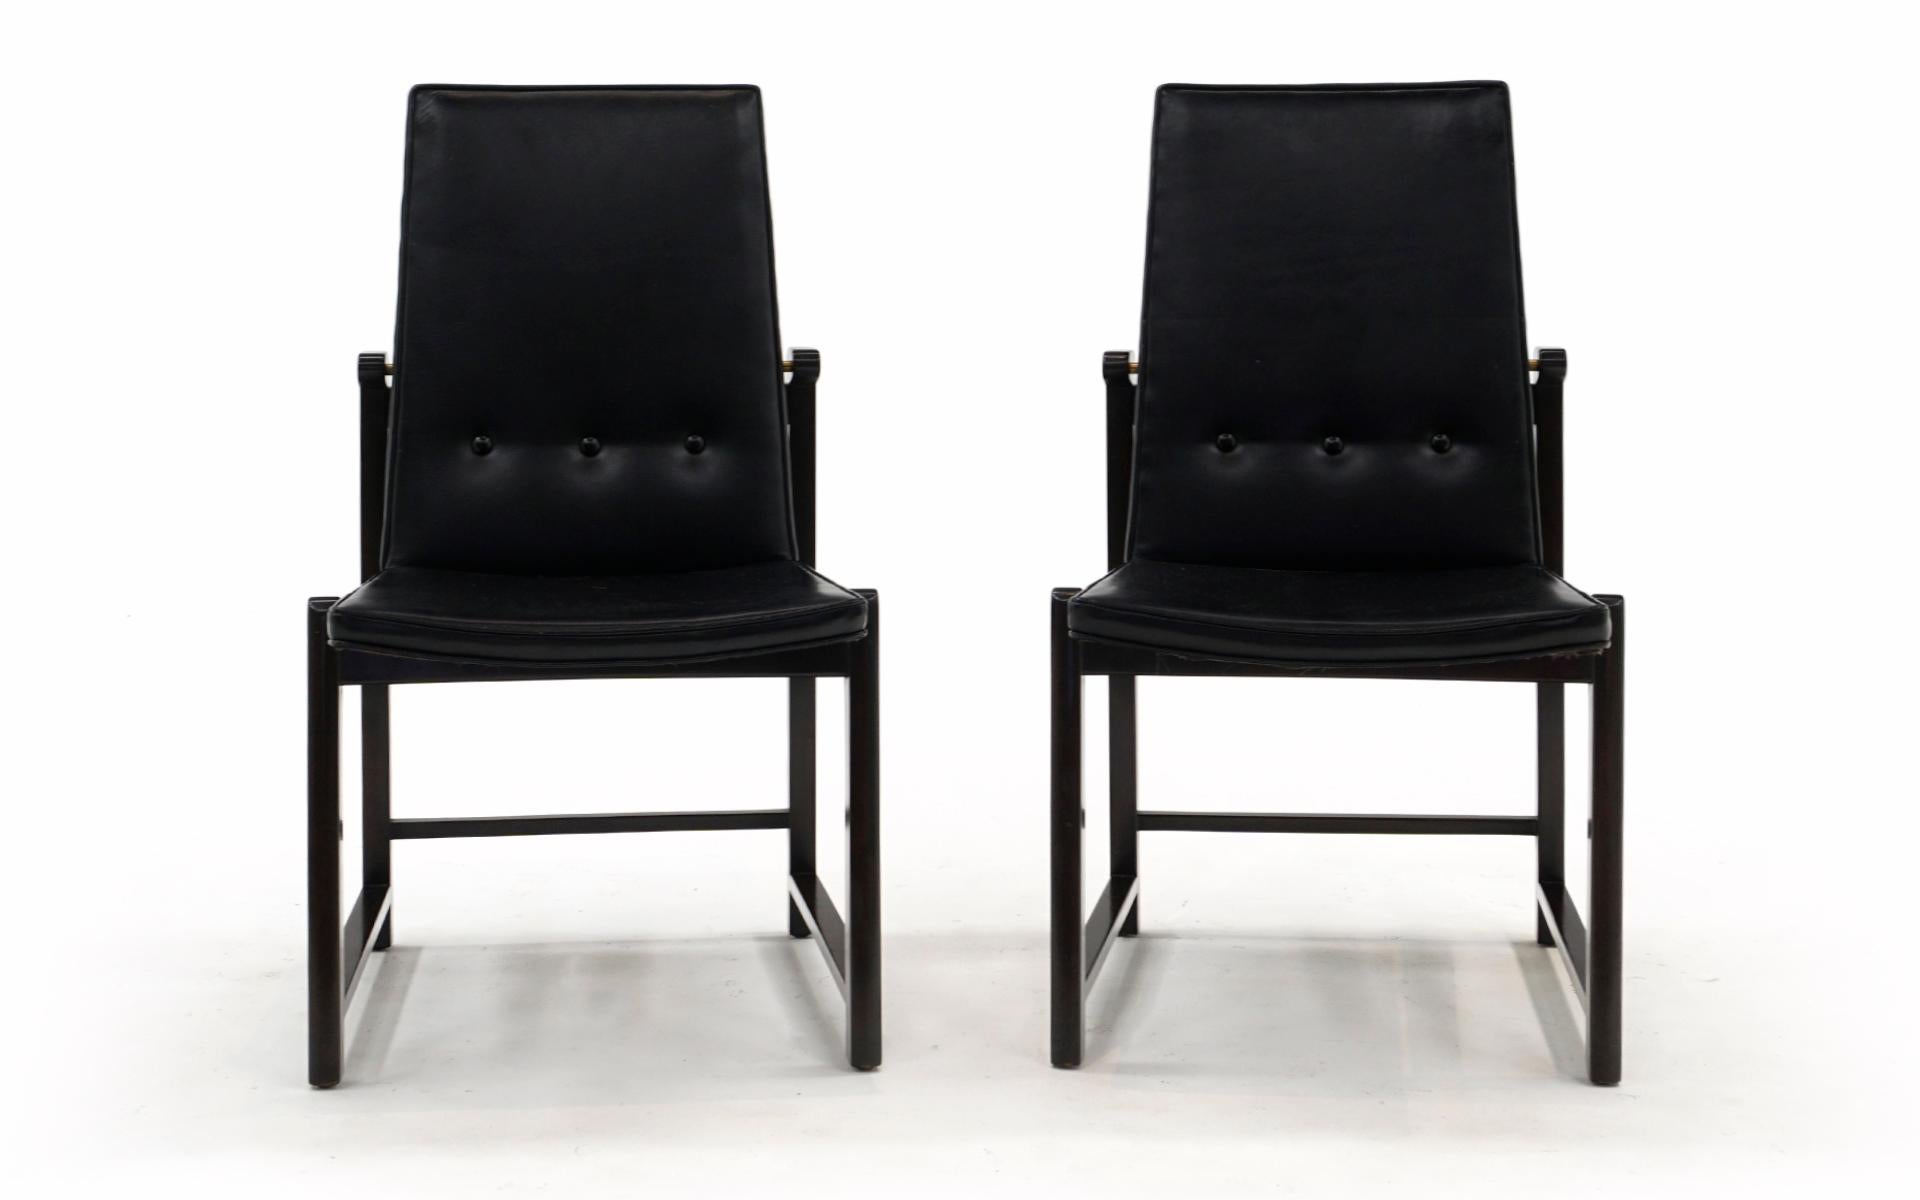 Very rare and desirable high back Dunbar dining chairs designed by Edward Wormley. Both chairs are completely original. The original black leather has no tears, scuffs, or repairs and show slight stretching on the seats. The mahogany frames show